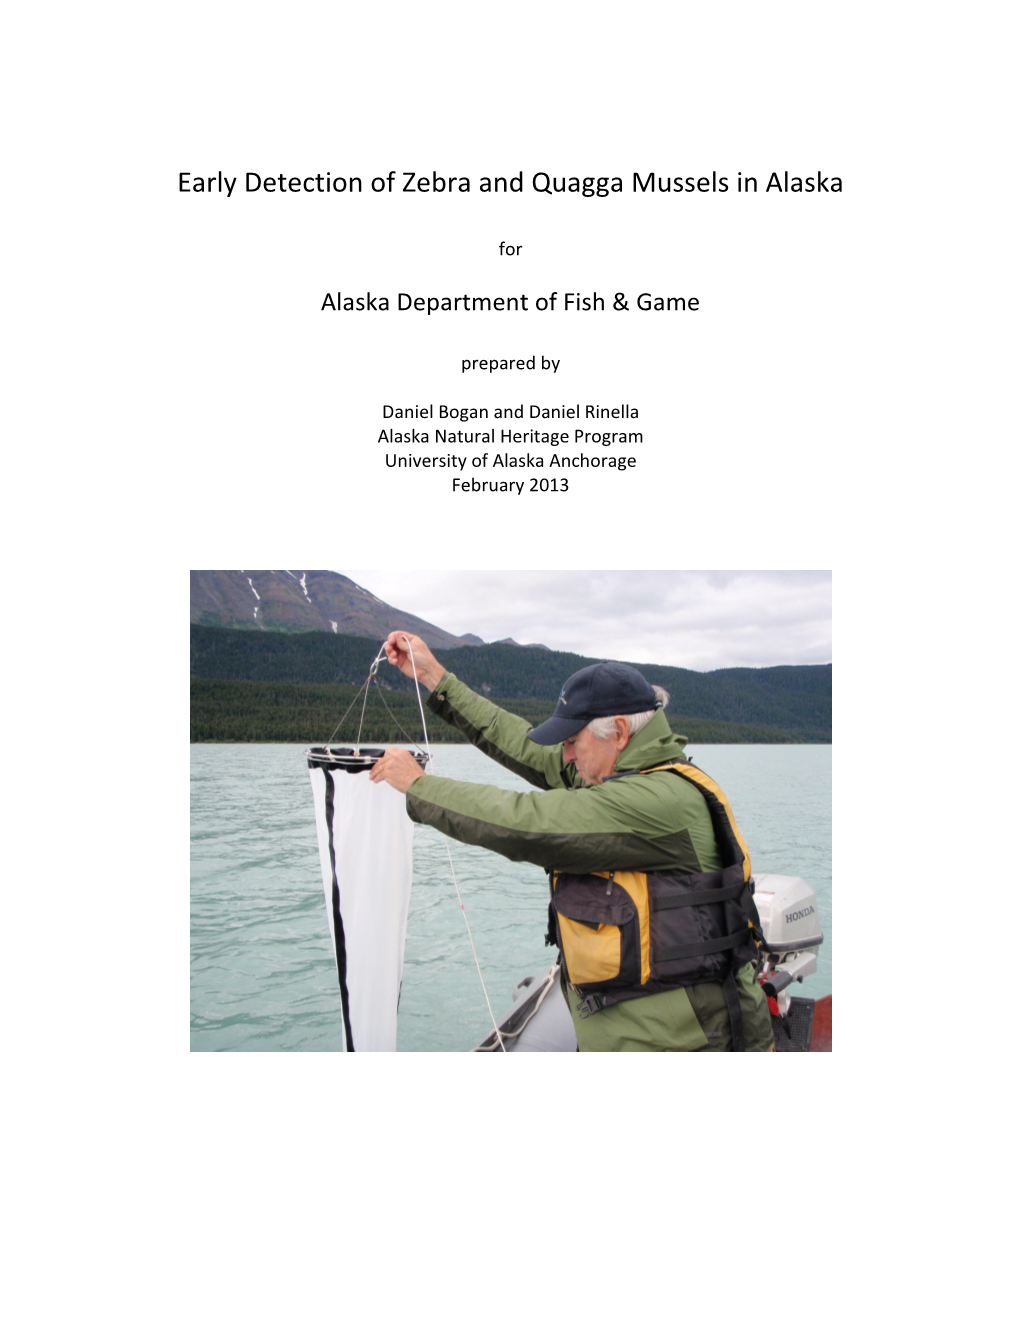 Early Detection of Zebra and Quagga Mussels in Alaska